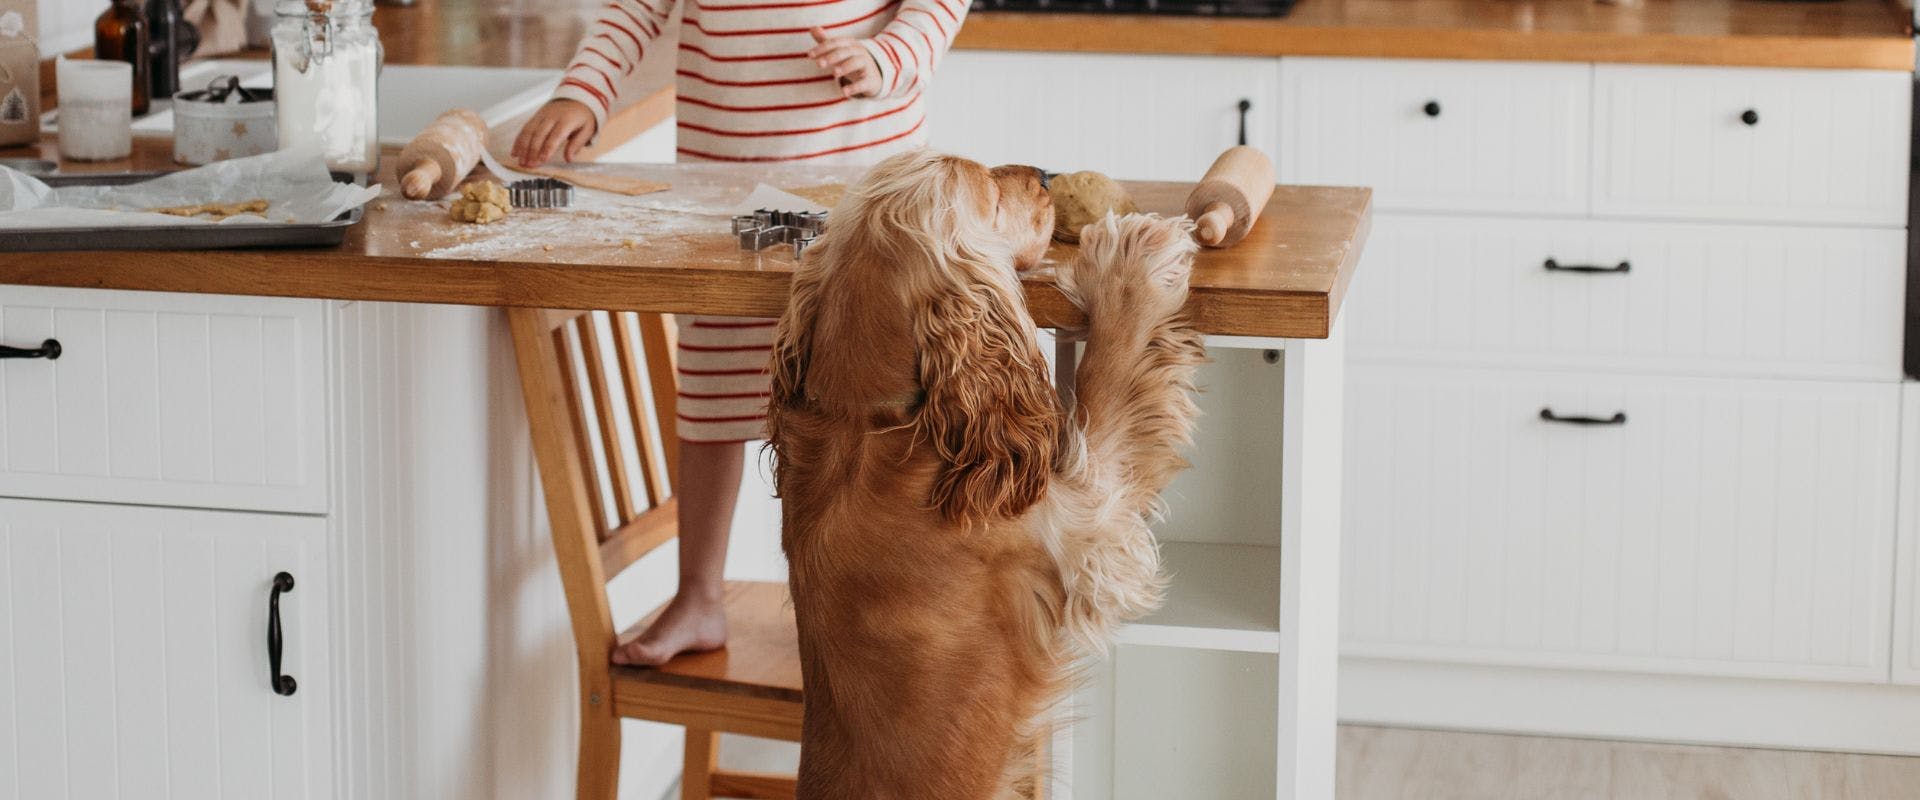 Spaniel dog jumping up at the kitchen side